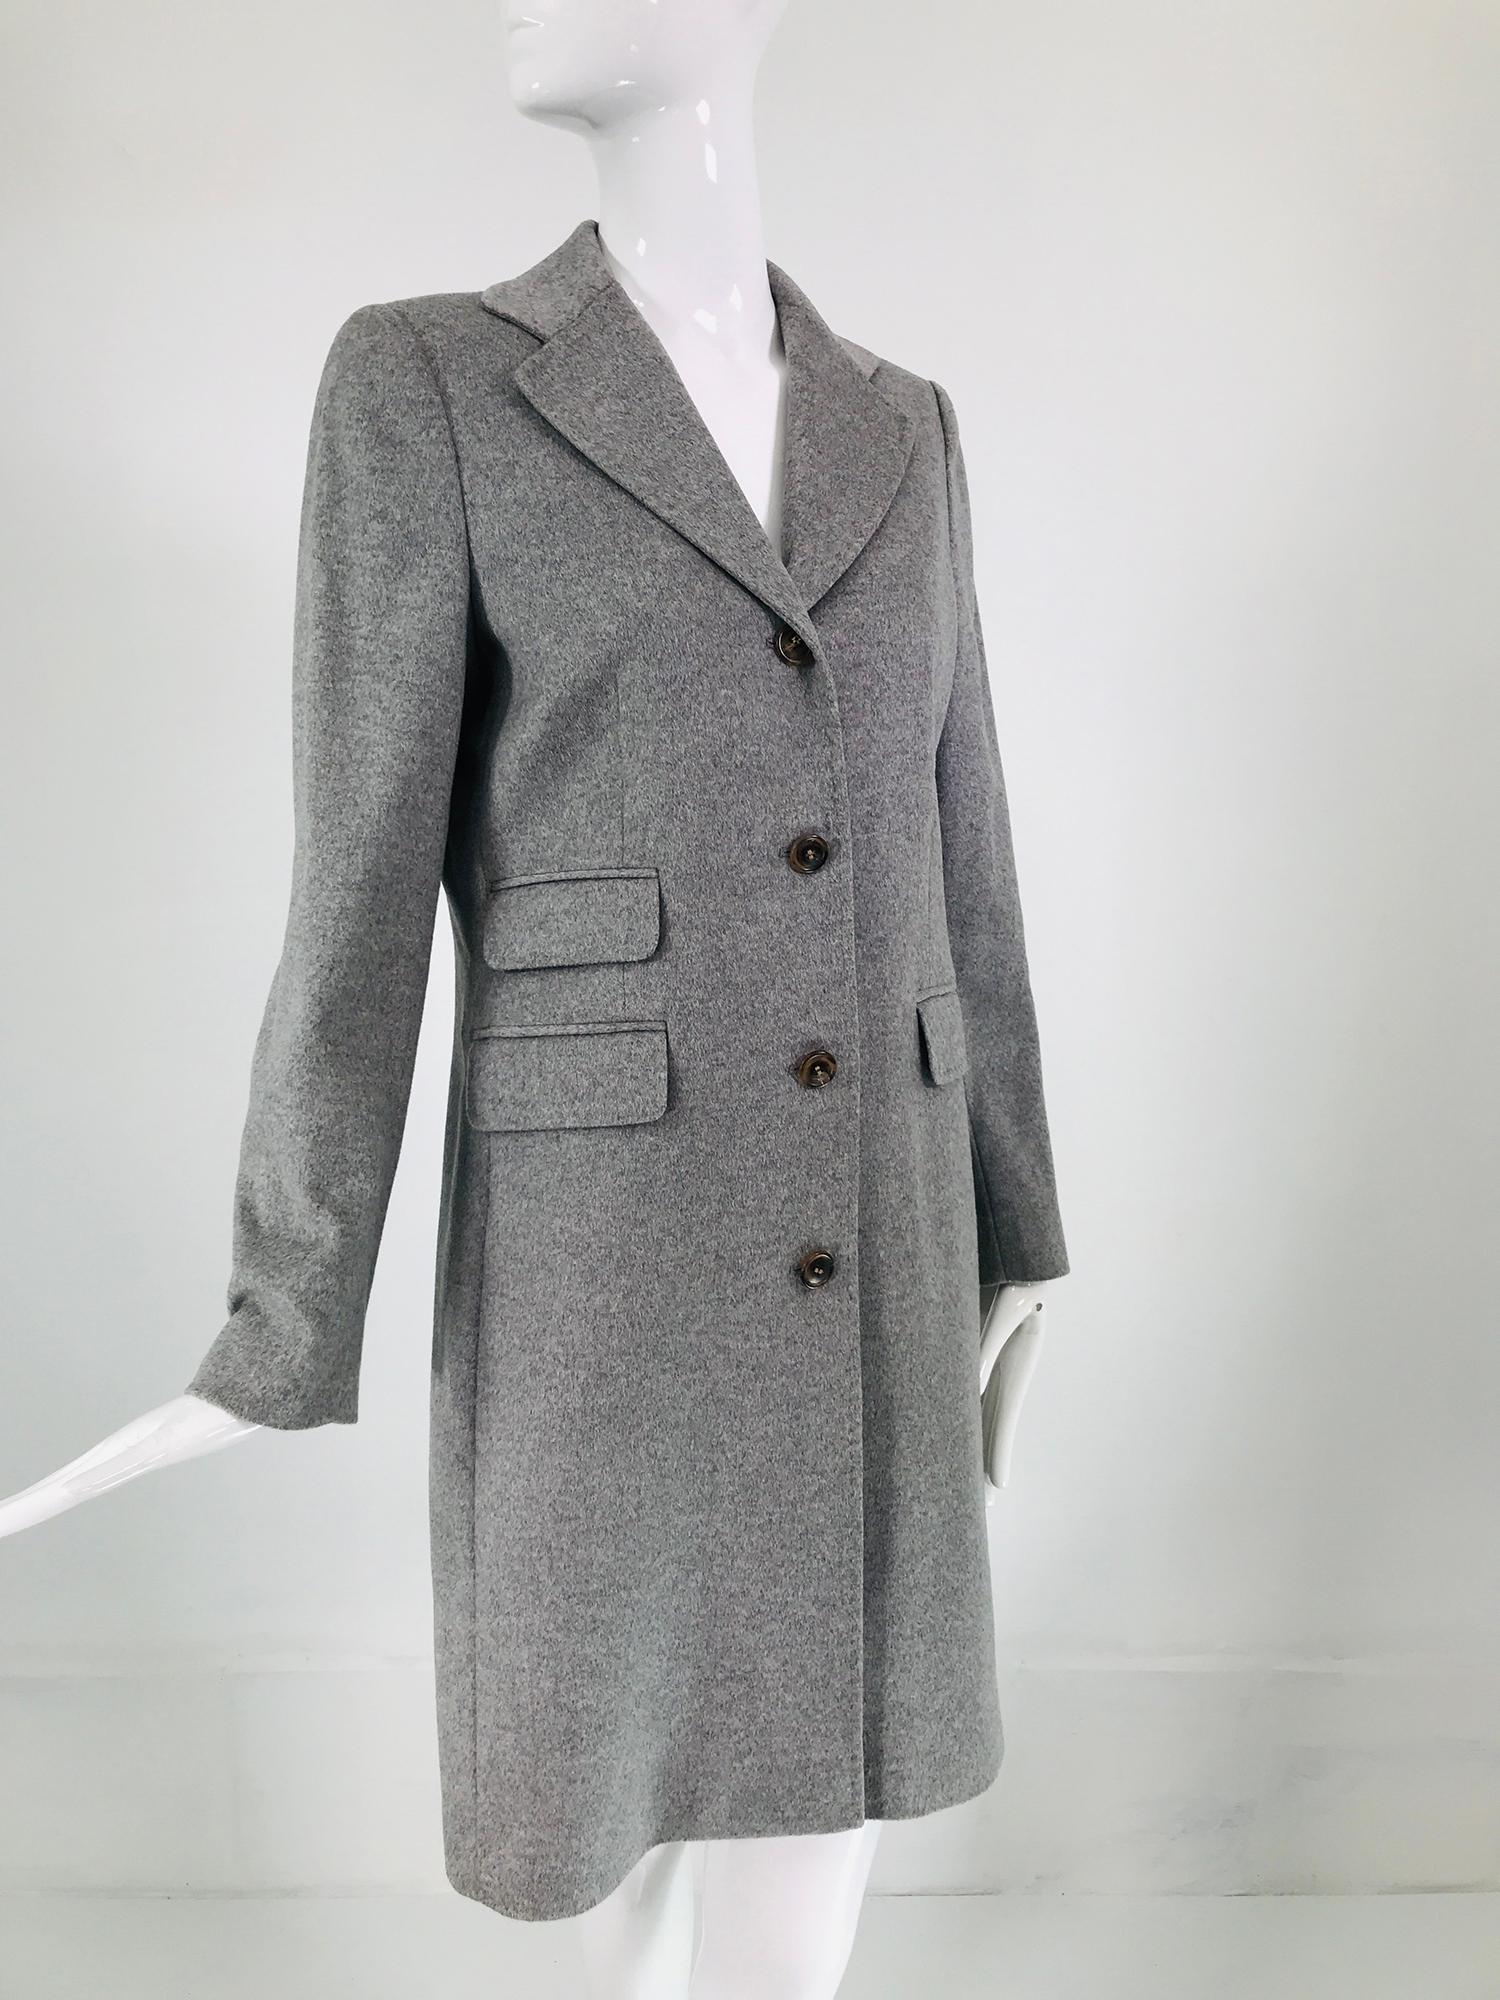 Eric Bompard pale grey cashmere single breasted coat. Classic man tailored coat with great details. Notched lapel collar, top stitching on facings, besom flap pockets, 2 on the right and 1 on the left. The long sleeves have button cuffs. The back